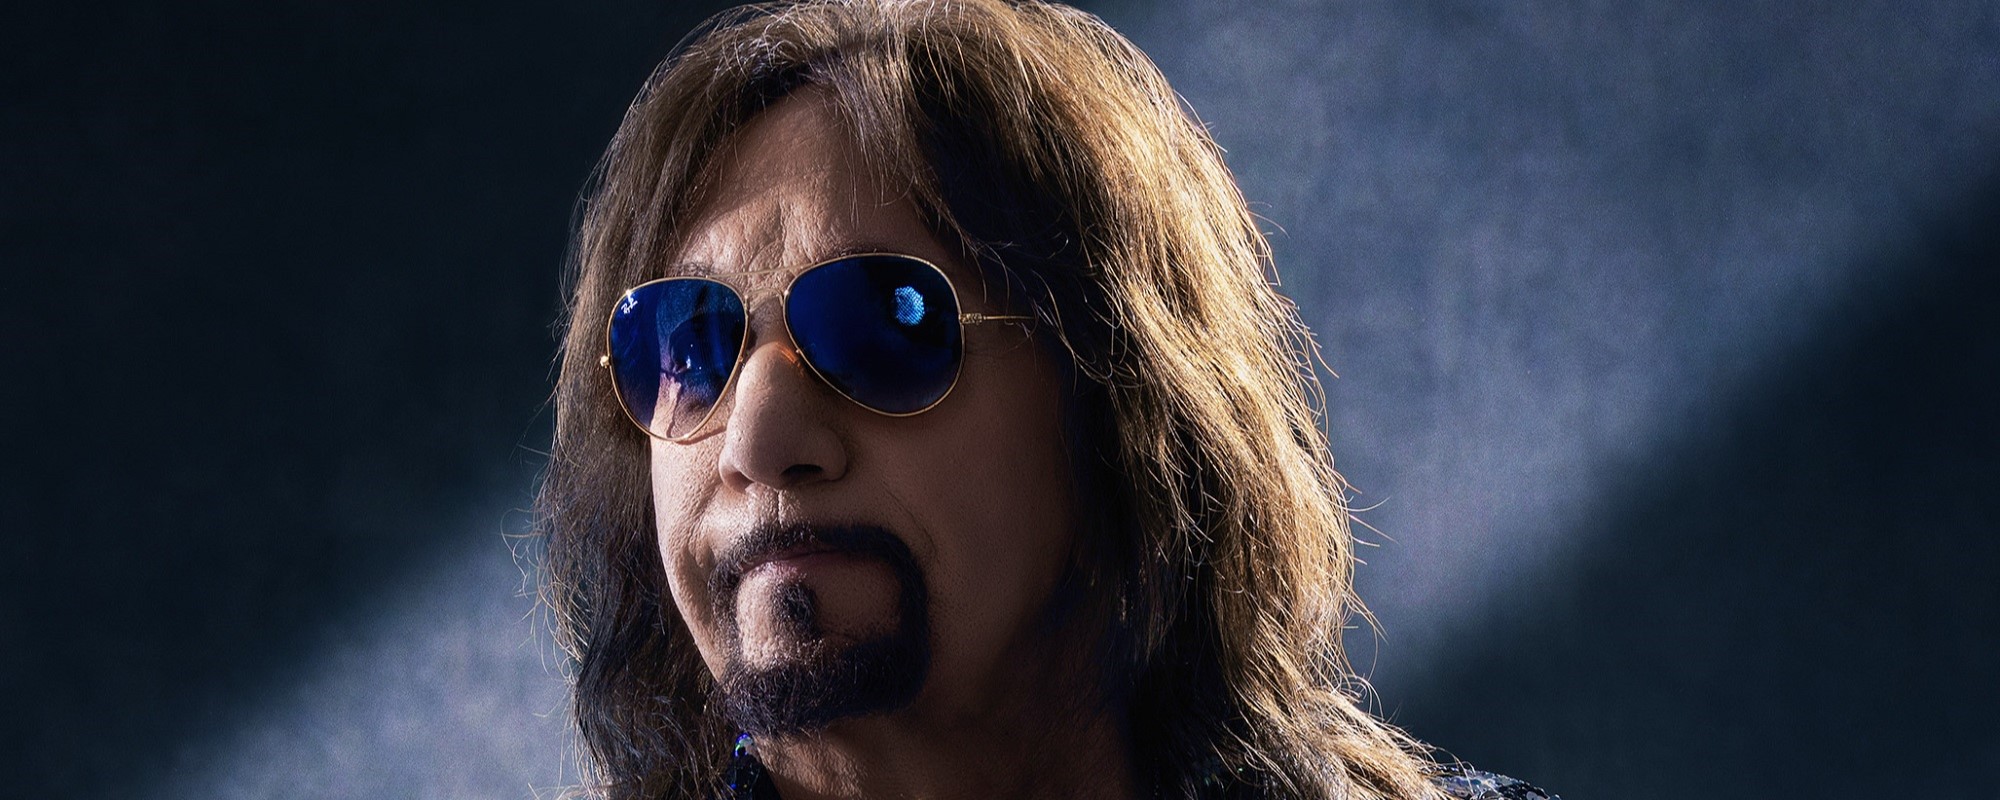 Watch Ace Frehley Jam with Space Aliens in Video for New Song “Walkin’ on the Moon”